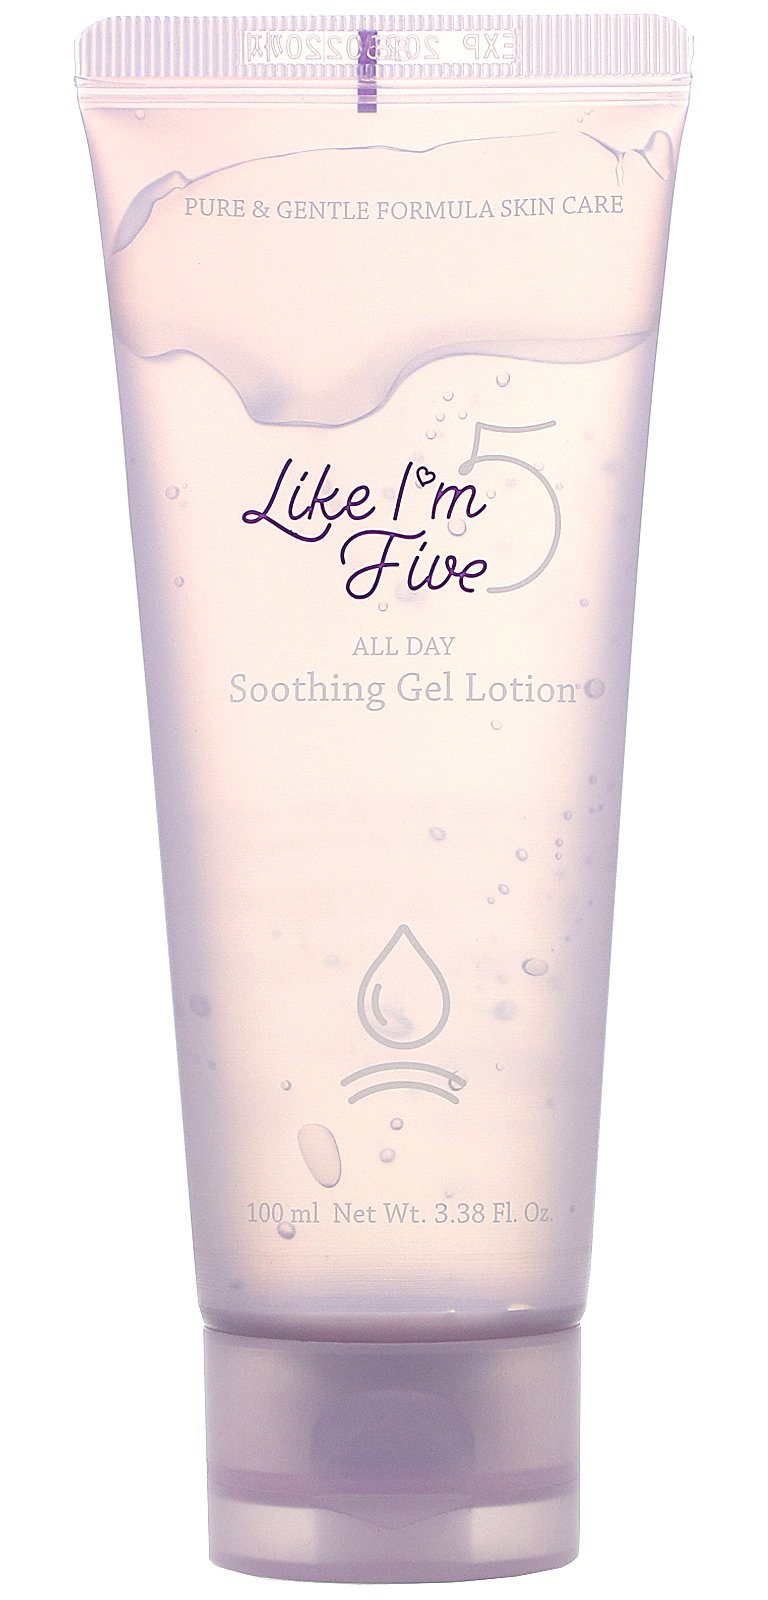 Like I'm five All Day Soothing Gel Lotion